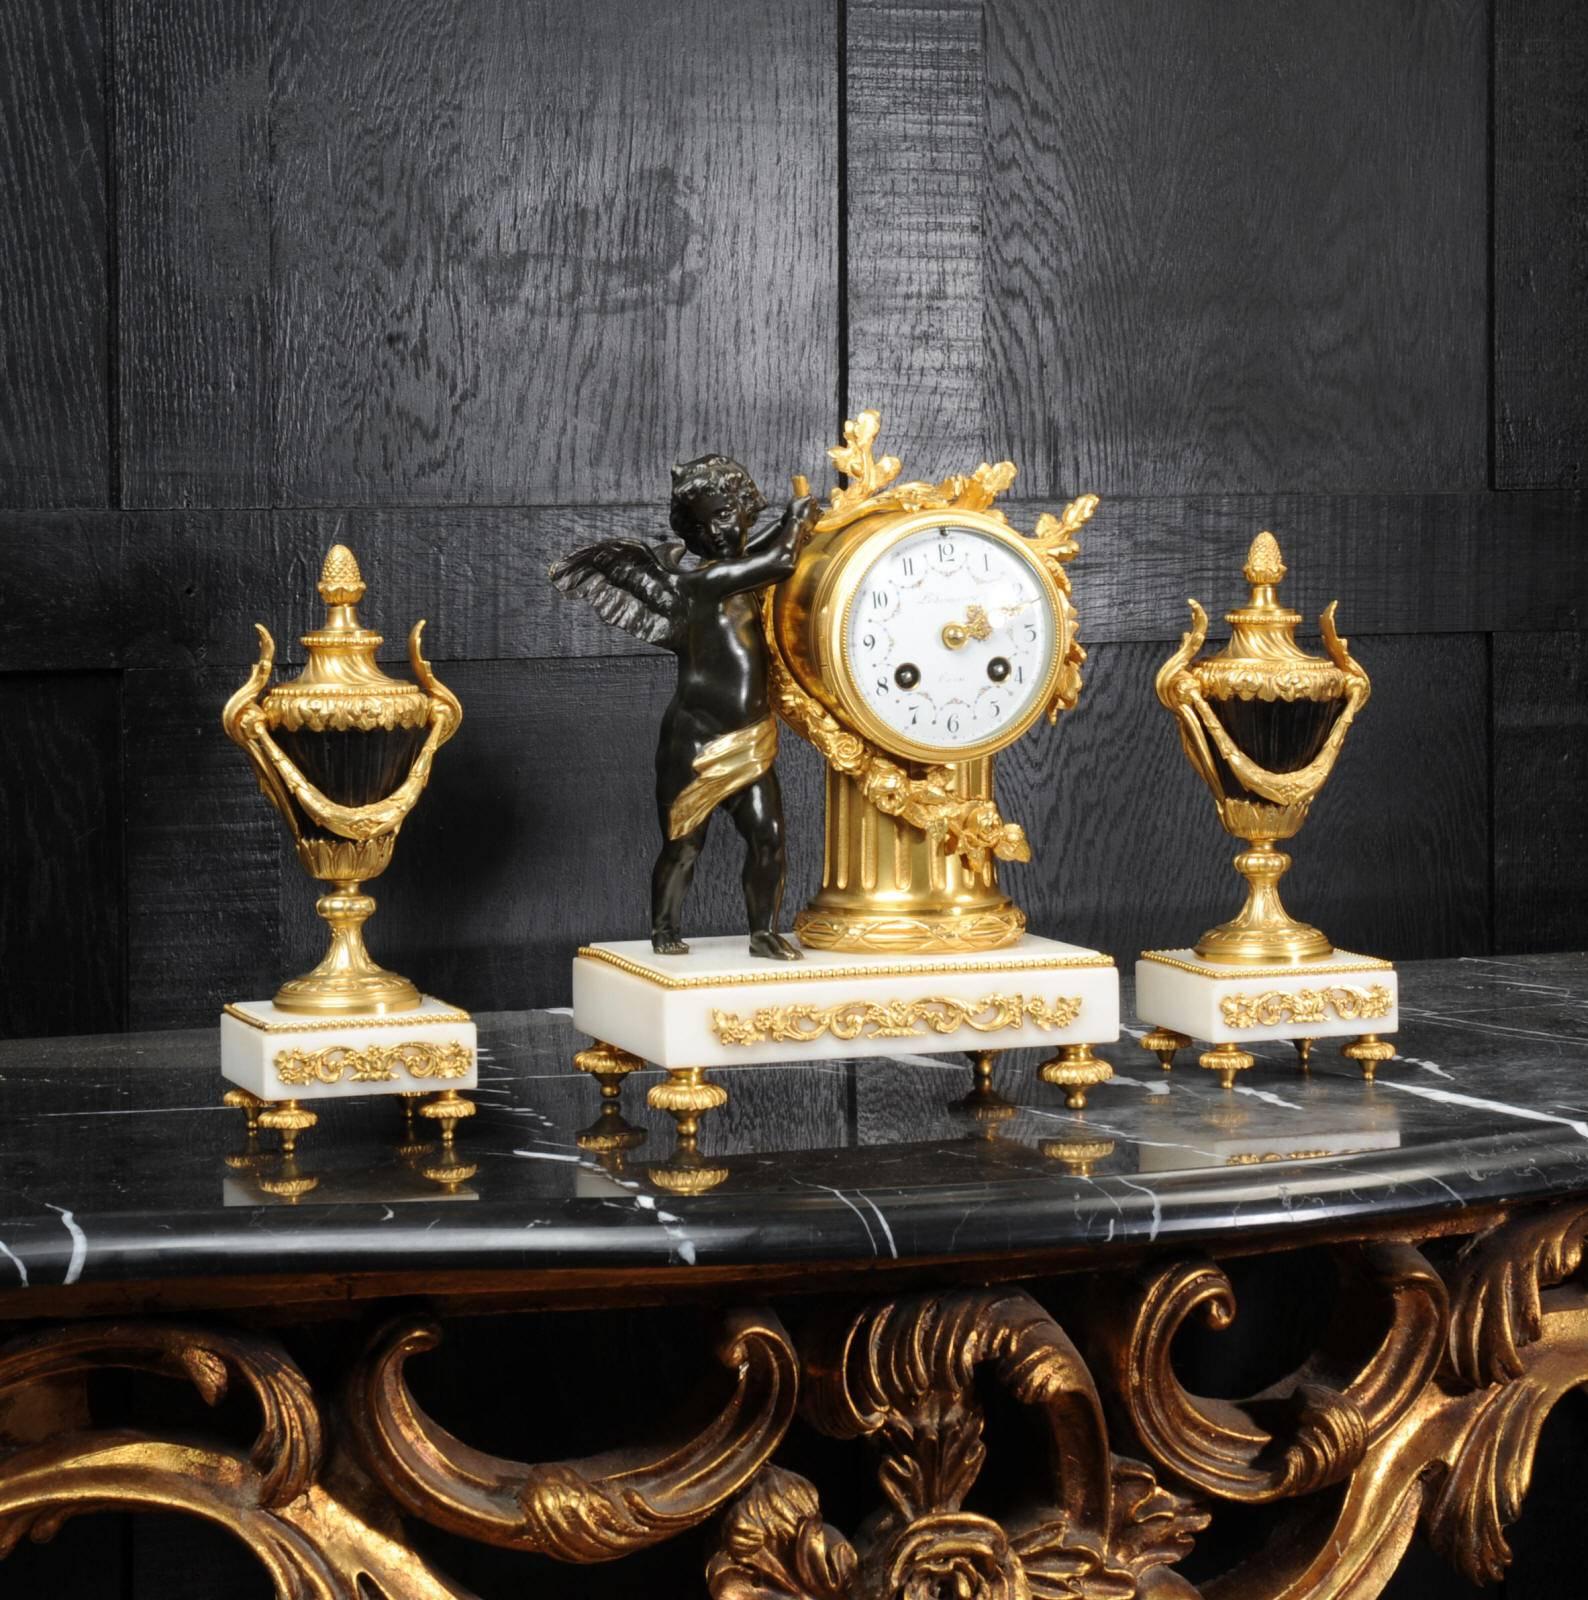 A superb antique French boudoir clock, beautifully made in bronze and ormolu and mounted on white marble bases. It features a bronze cherub draping laurel wreaths over the clock which is mounted on a classical column. Side urns are bronze-mounted